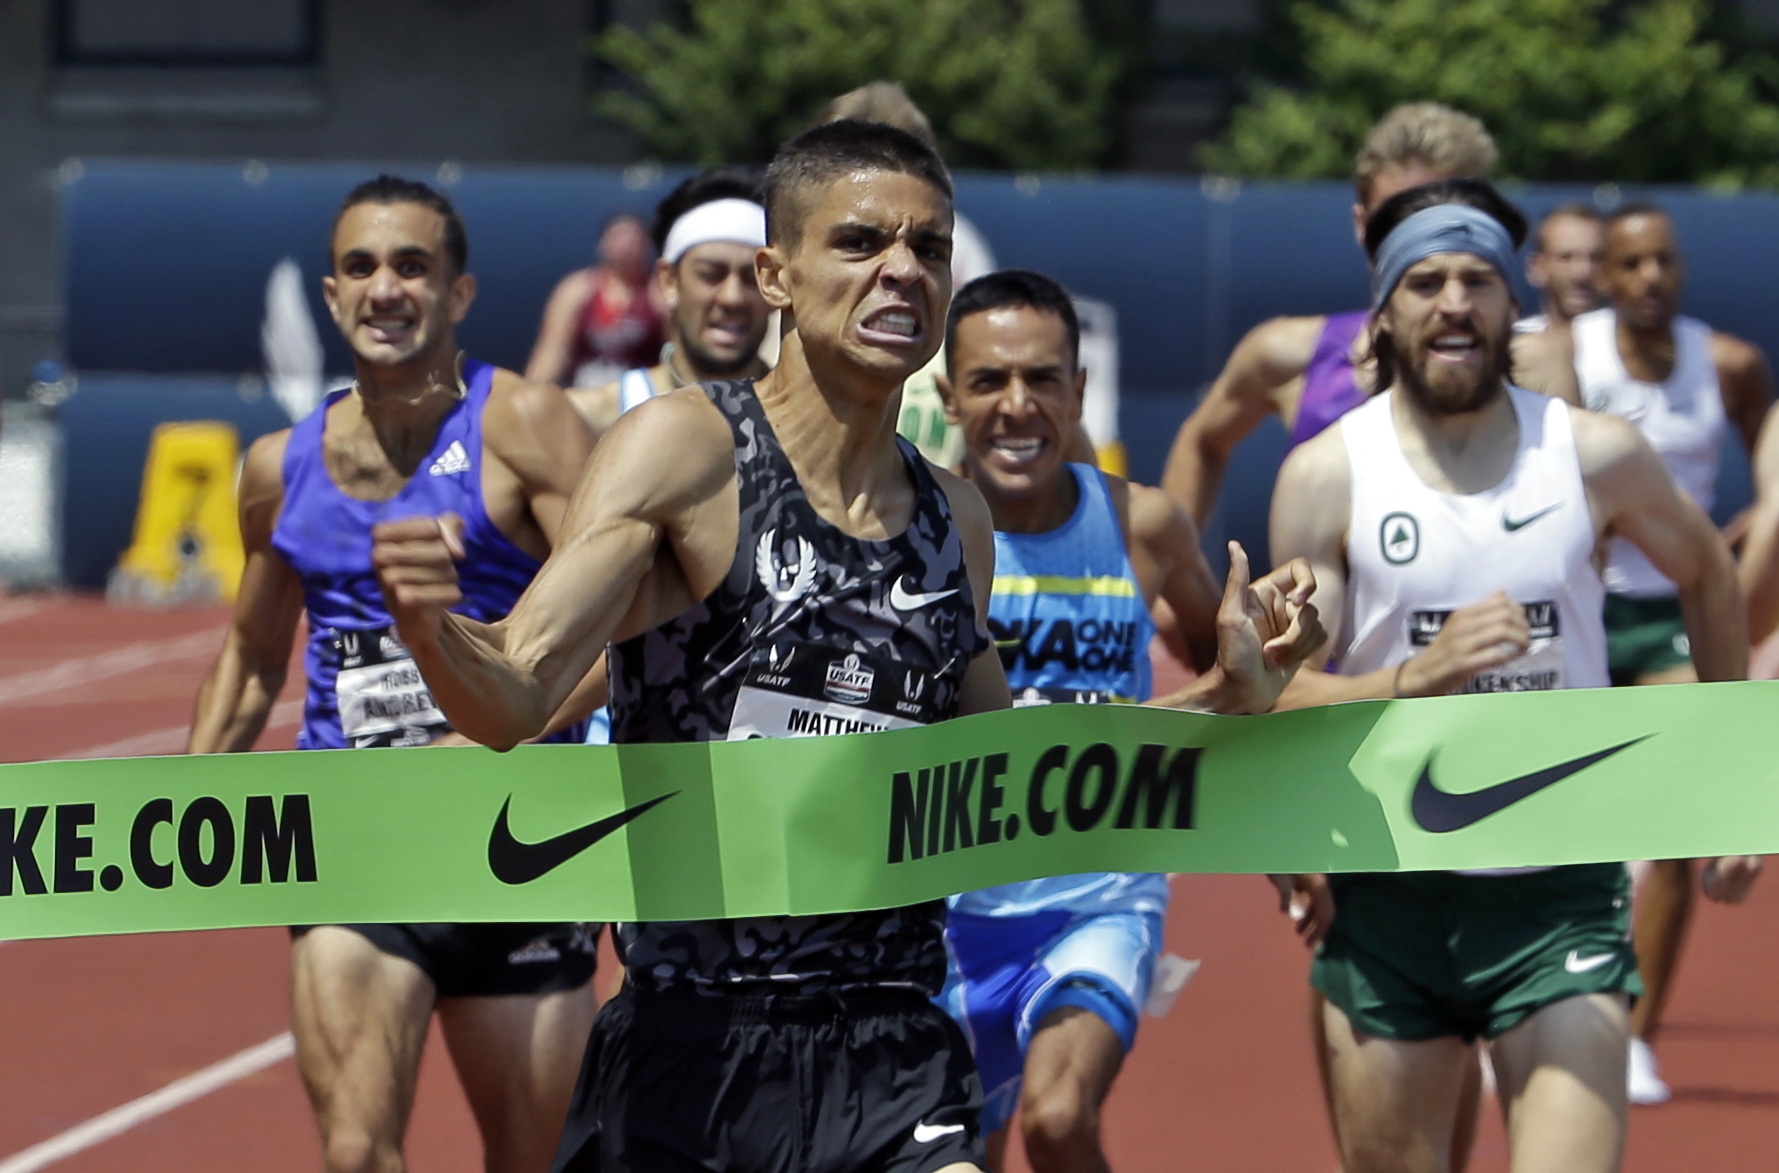 Matthew Centrowitz hits the tape to win the 1,500 meters at the U.S. Track and Field Championships in Eugene, Ore., Saturday, June 27, 2015. (AP Photo/Don Ryan)